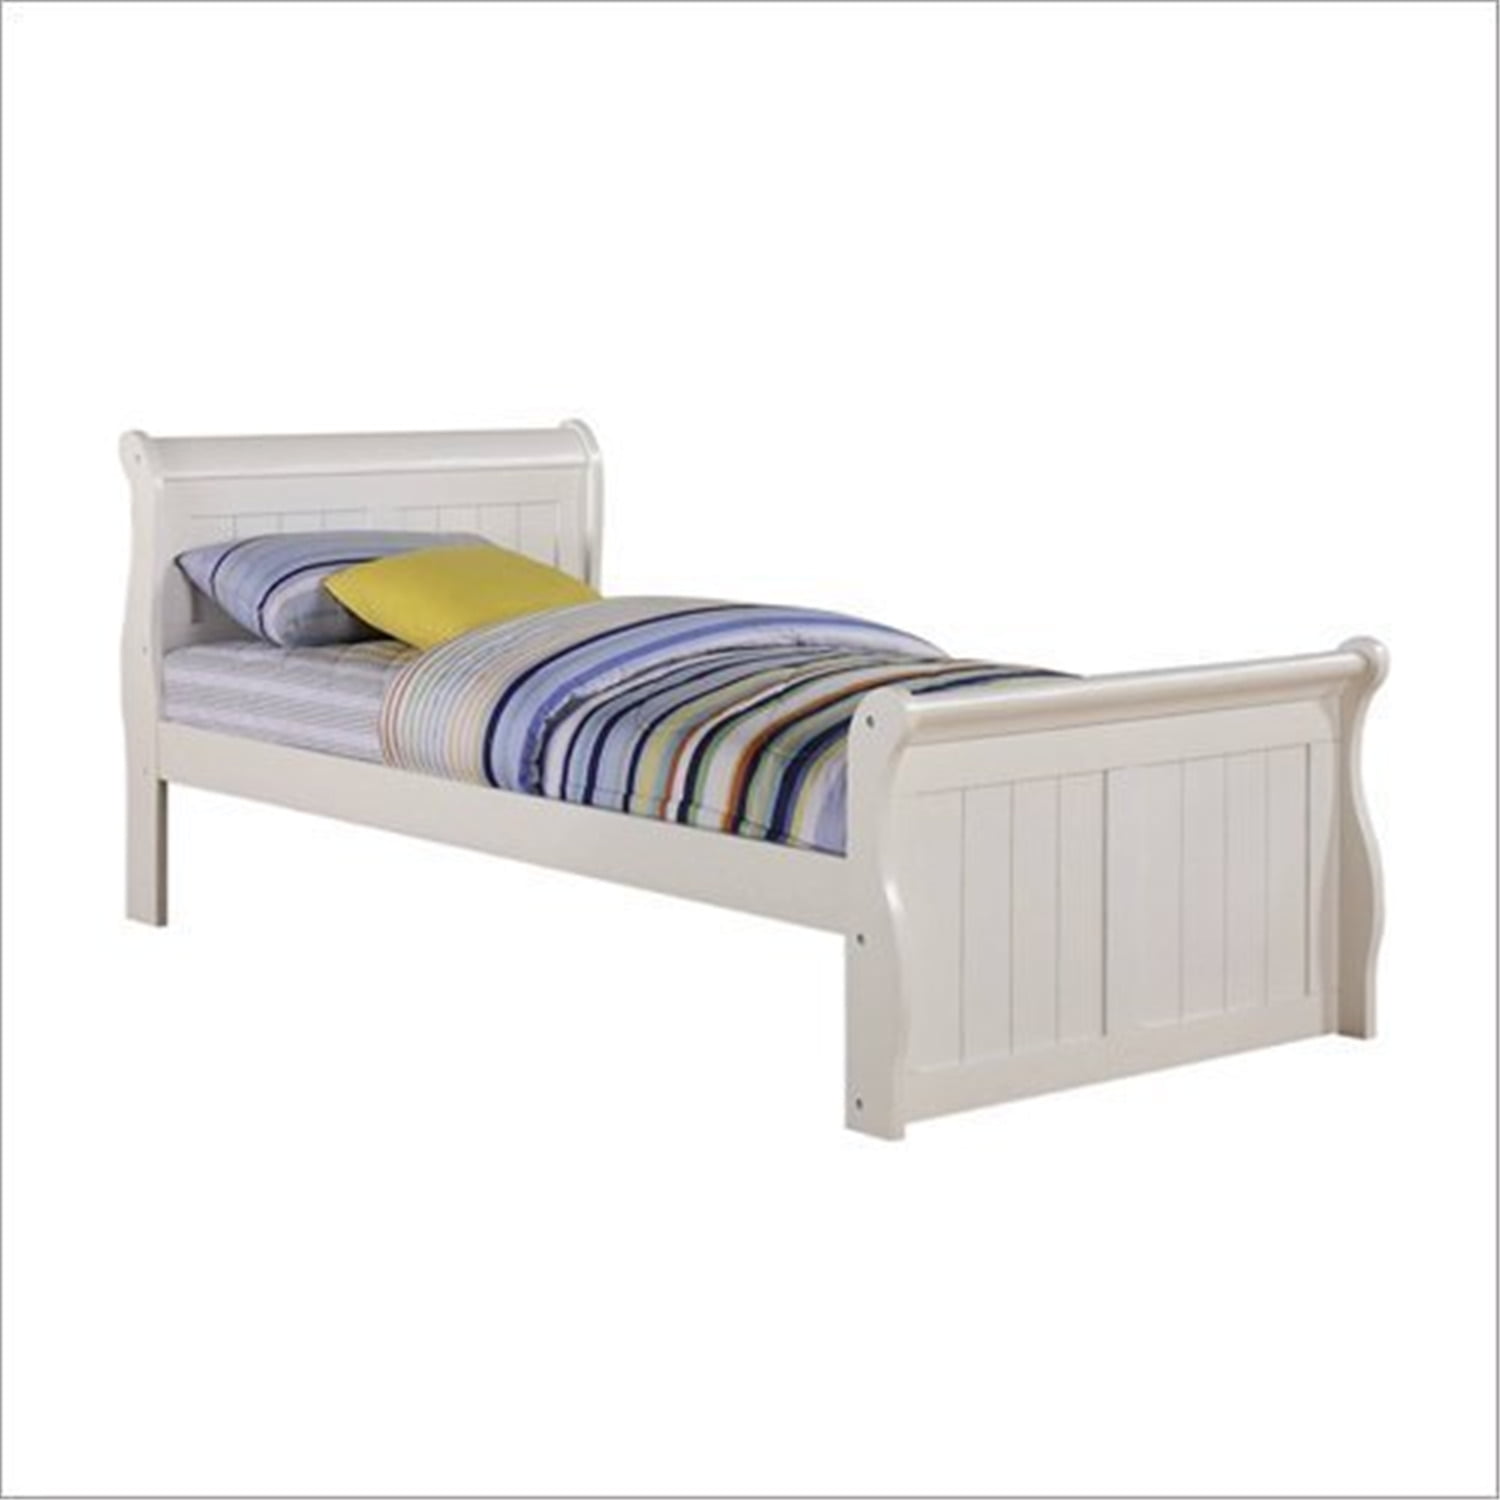 Donco Kids Sleigh Bed Color White Size, White Twin Sleigh Bed With Trundle